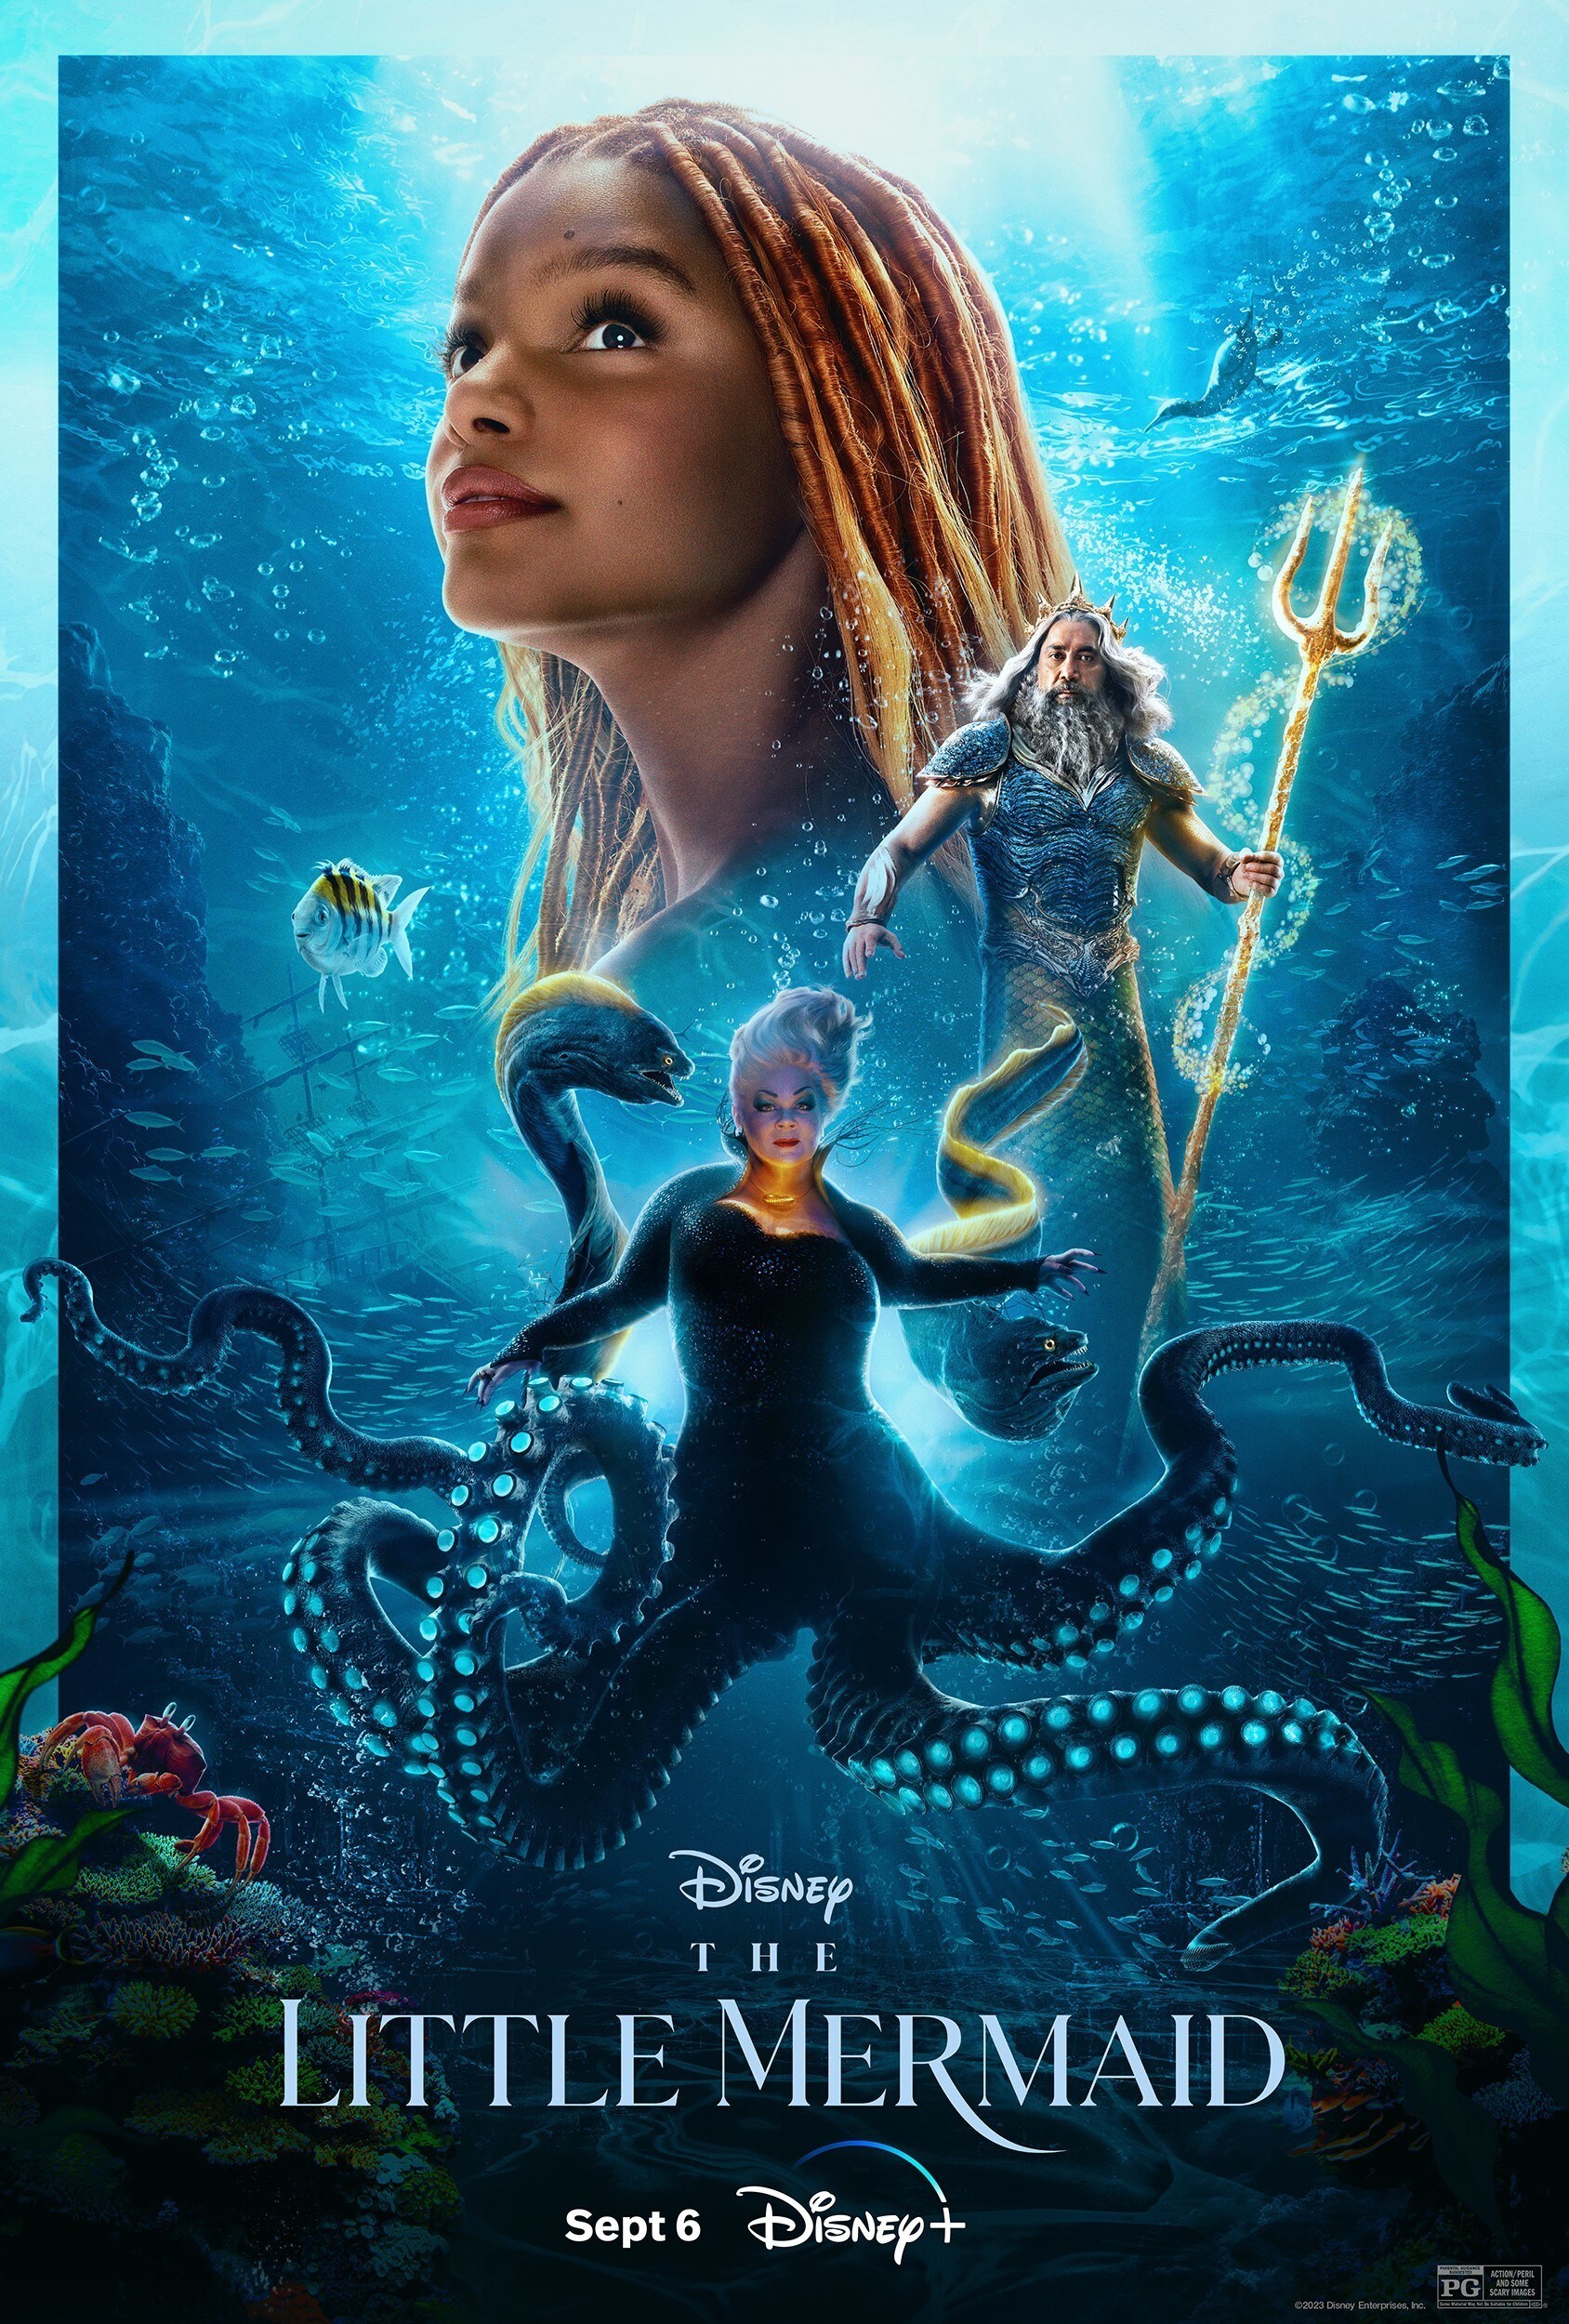 Disney's Live-Action Reimagining Of “The Little Mermaid” To Debut